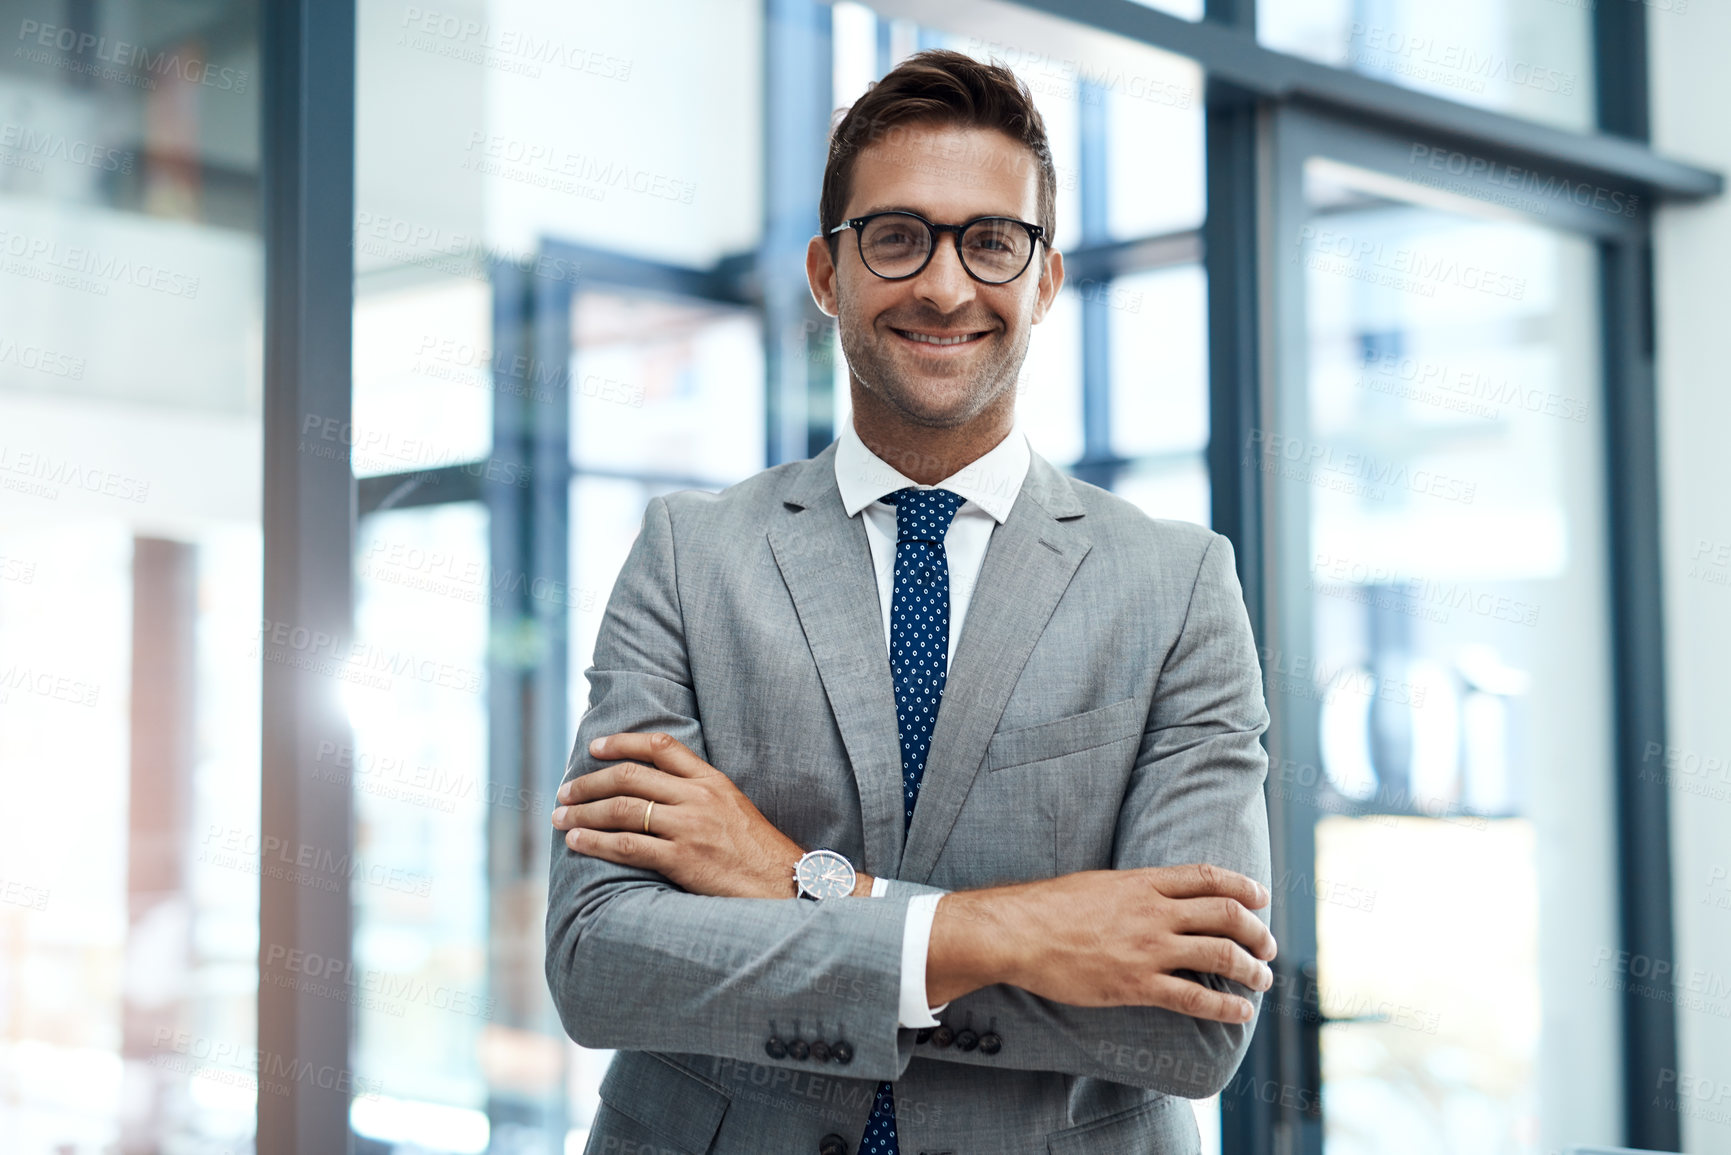 Buy stock photo Portrait of a well-dressed businessman standing in his office